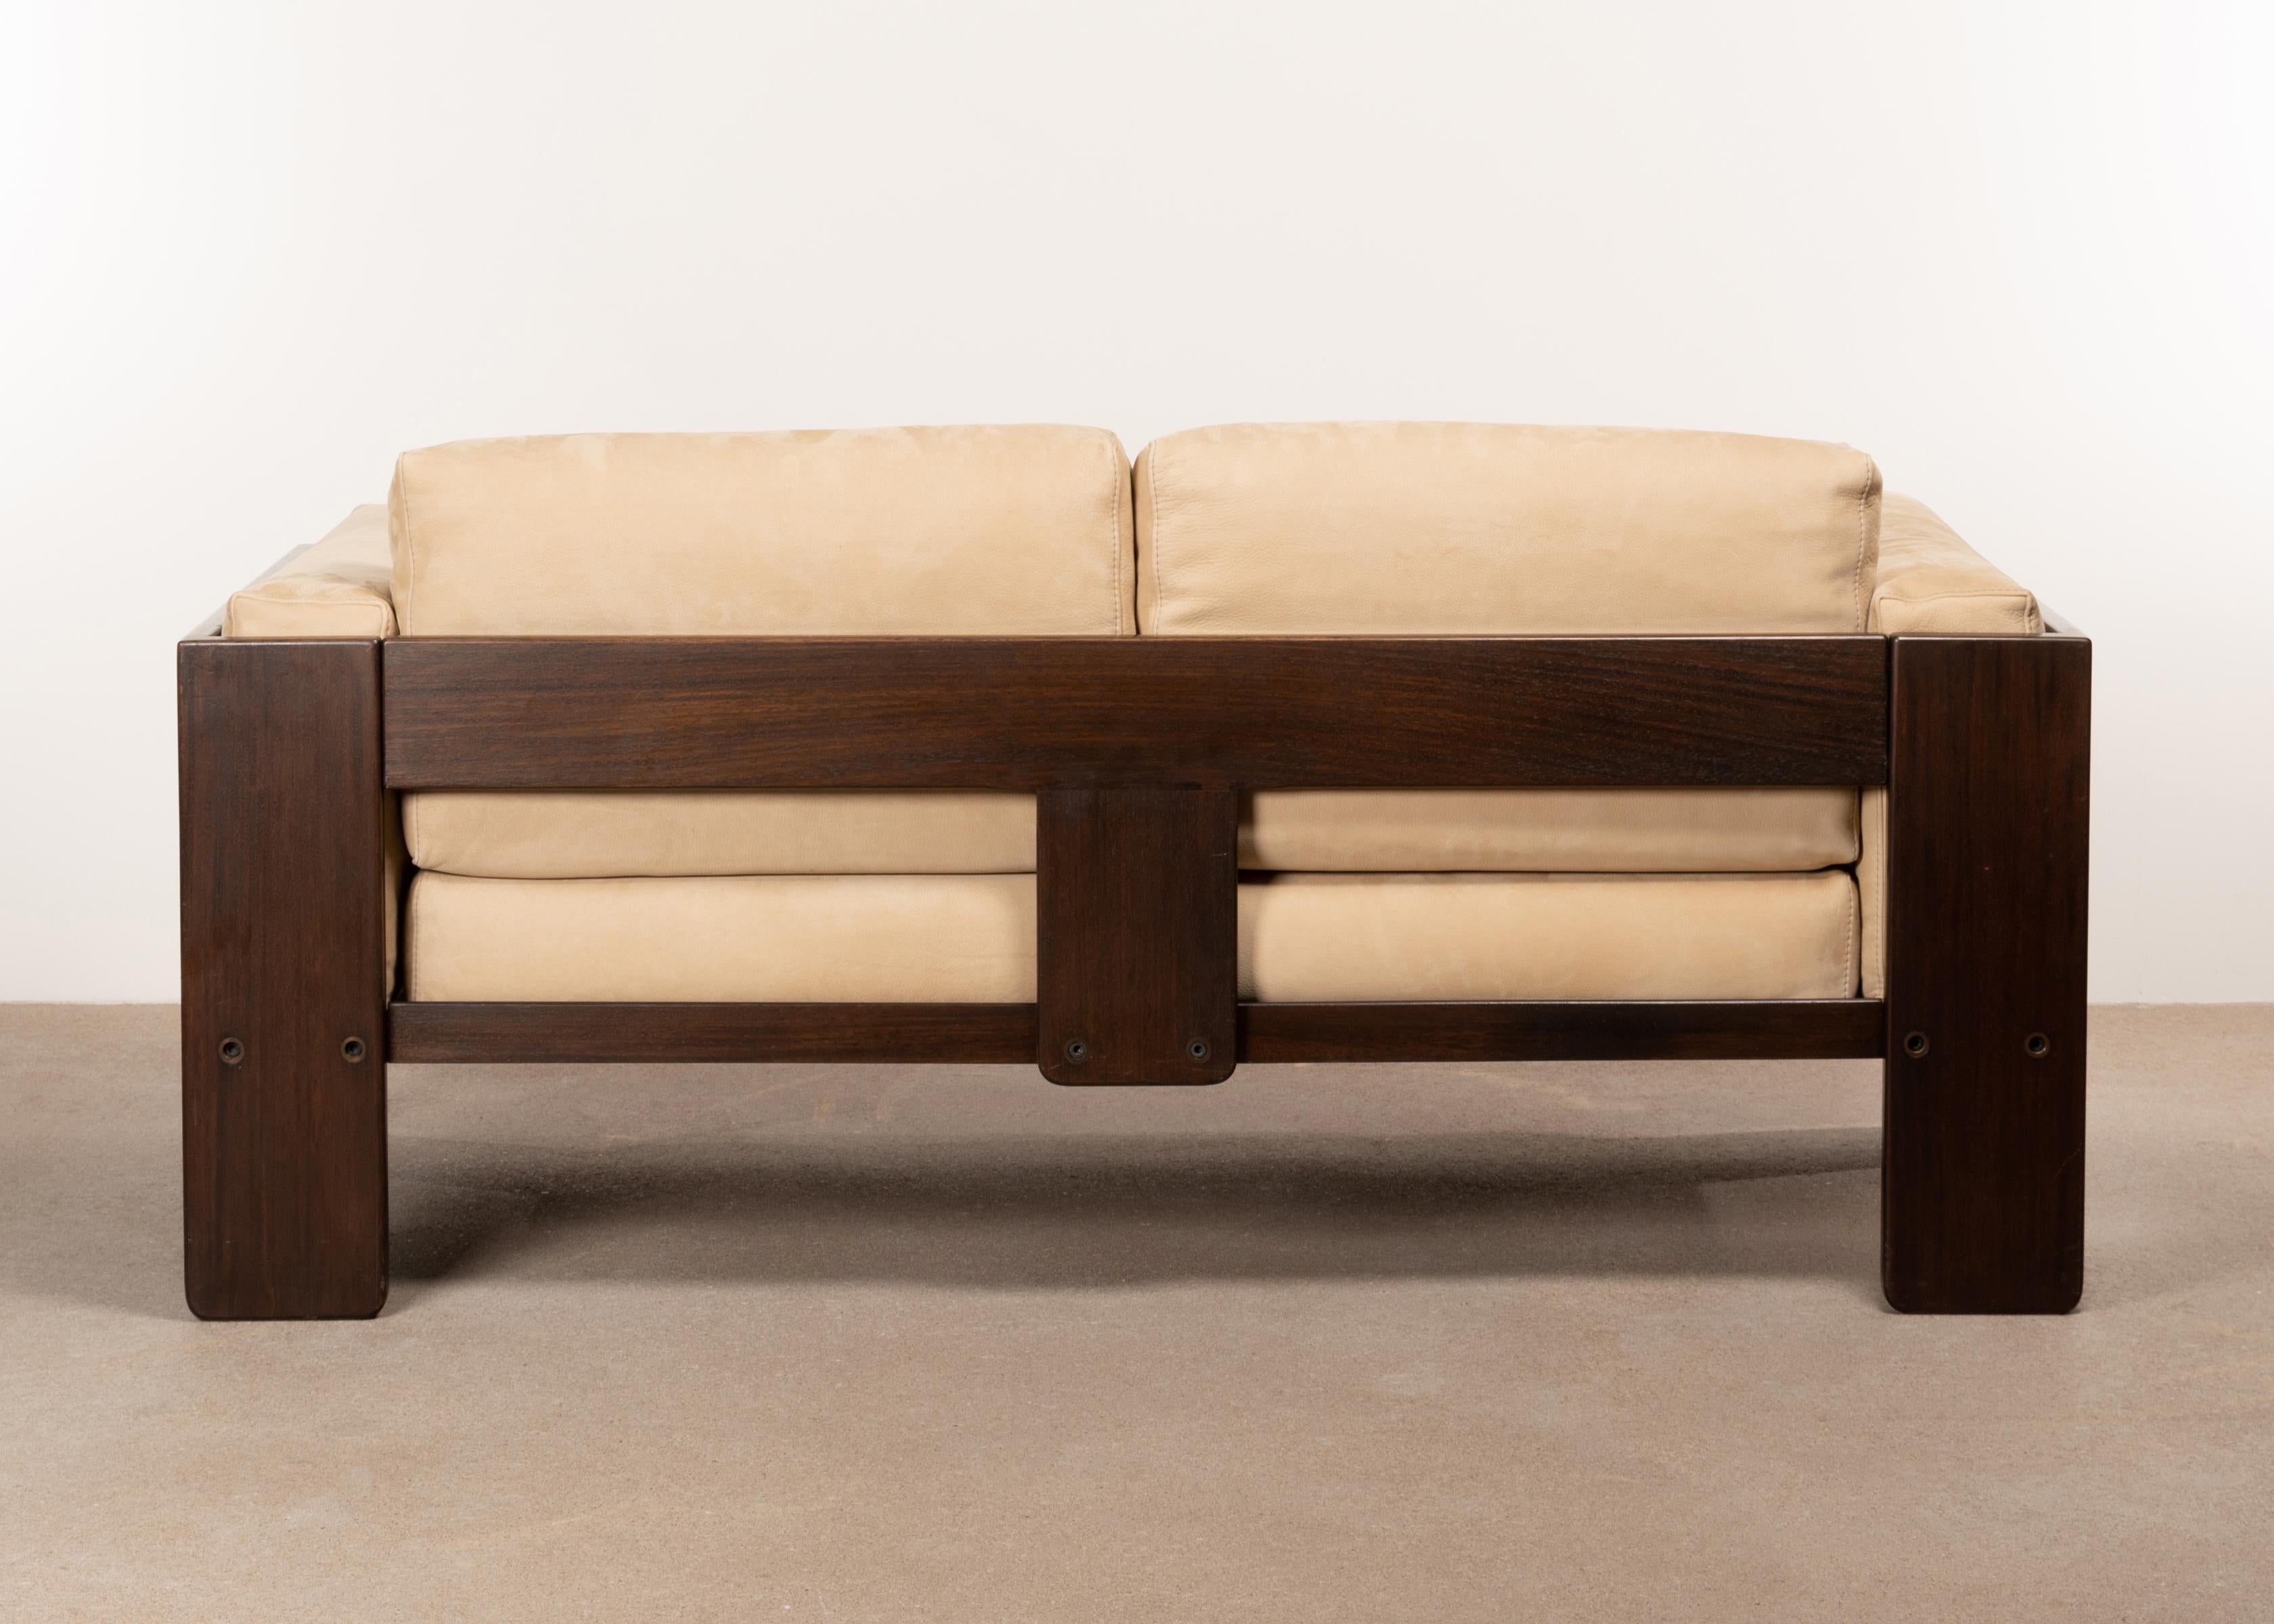 Veneer Tobia Scarpa Bastiano 2-Seater Sofa in Walnut and Beige Suede Leather for Knoll